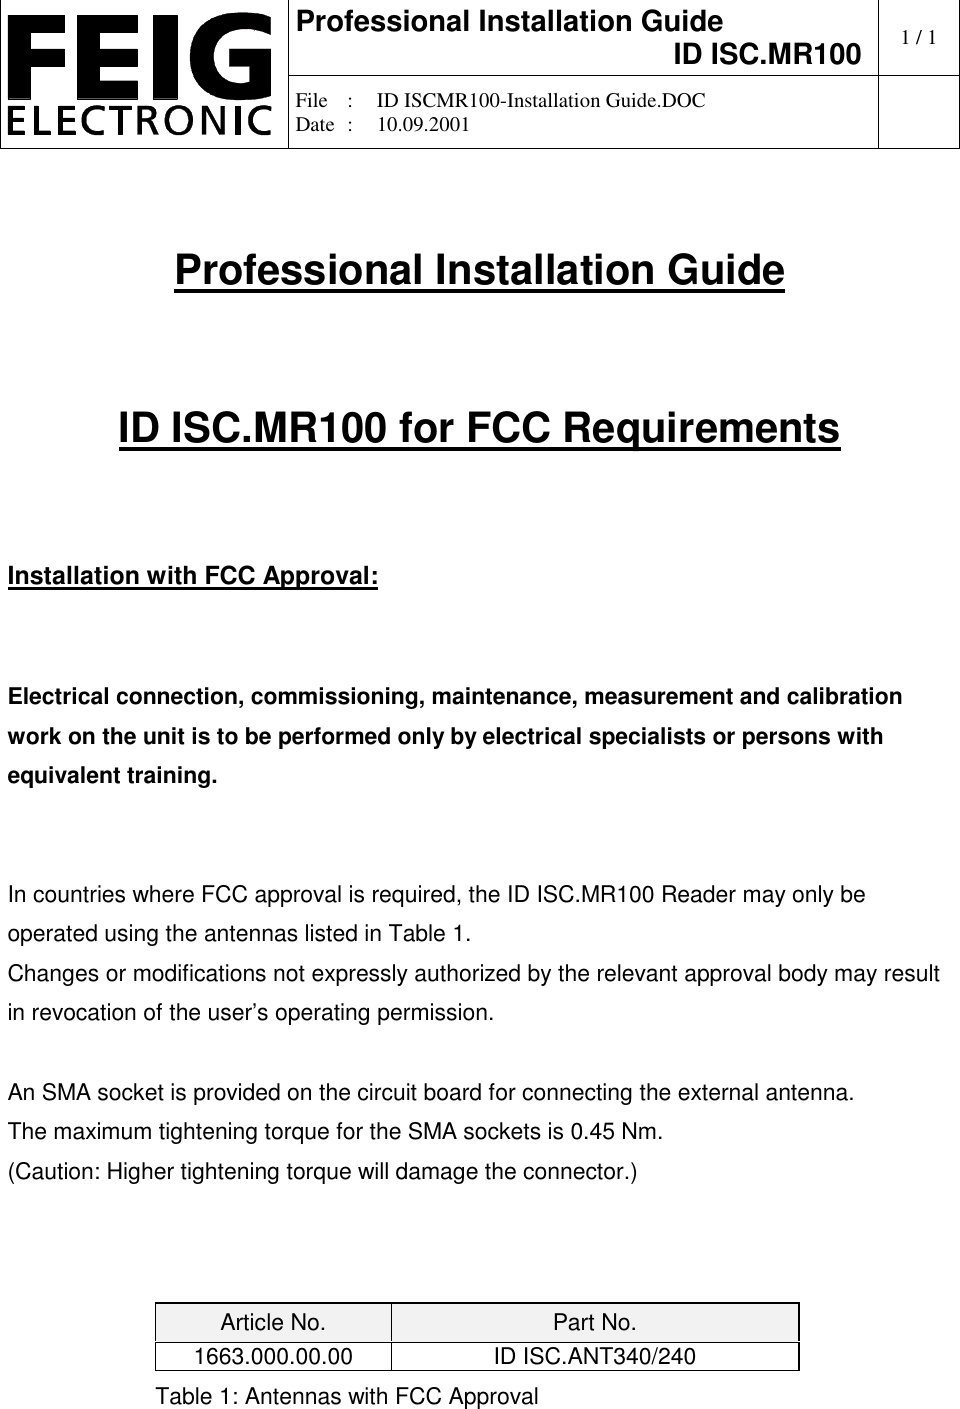 Professional Installation GuideID ISC.MR100 1/1File :ID ISCMR100-Installation Guide.DOCDate :10.09.2001Professional Installation GuideID ISC.MR100 for FCC RequirementsInstallation with FCC Approval:Electrical connection, commissioning, maintenance, measurement and calibrationwork on the unit is to be performed only by electrical specialists or persons withequivalent training.In countries where FCC approval is required, the ID ISC.MR100 Reader may only beoperated using the antennas listed in Table 1.Changes or modifications not expressly authorized by the relevant approval body may resultin revocation of the user’s operating permission.An SMA socket is provided on the circuit board for connecting the external antenna.The maximum tightening torque for the SMA sockets is 0.45 Nm.(Caution: Higher tightening torque will damage the connector.)Article No. Part No.1663.000.00.00 ID ISC.ANT340/240Table 1: Antennas with FCC Approval